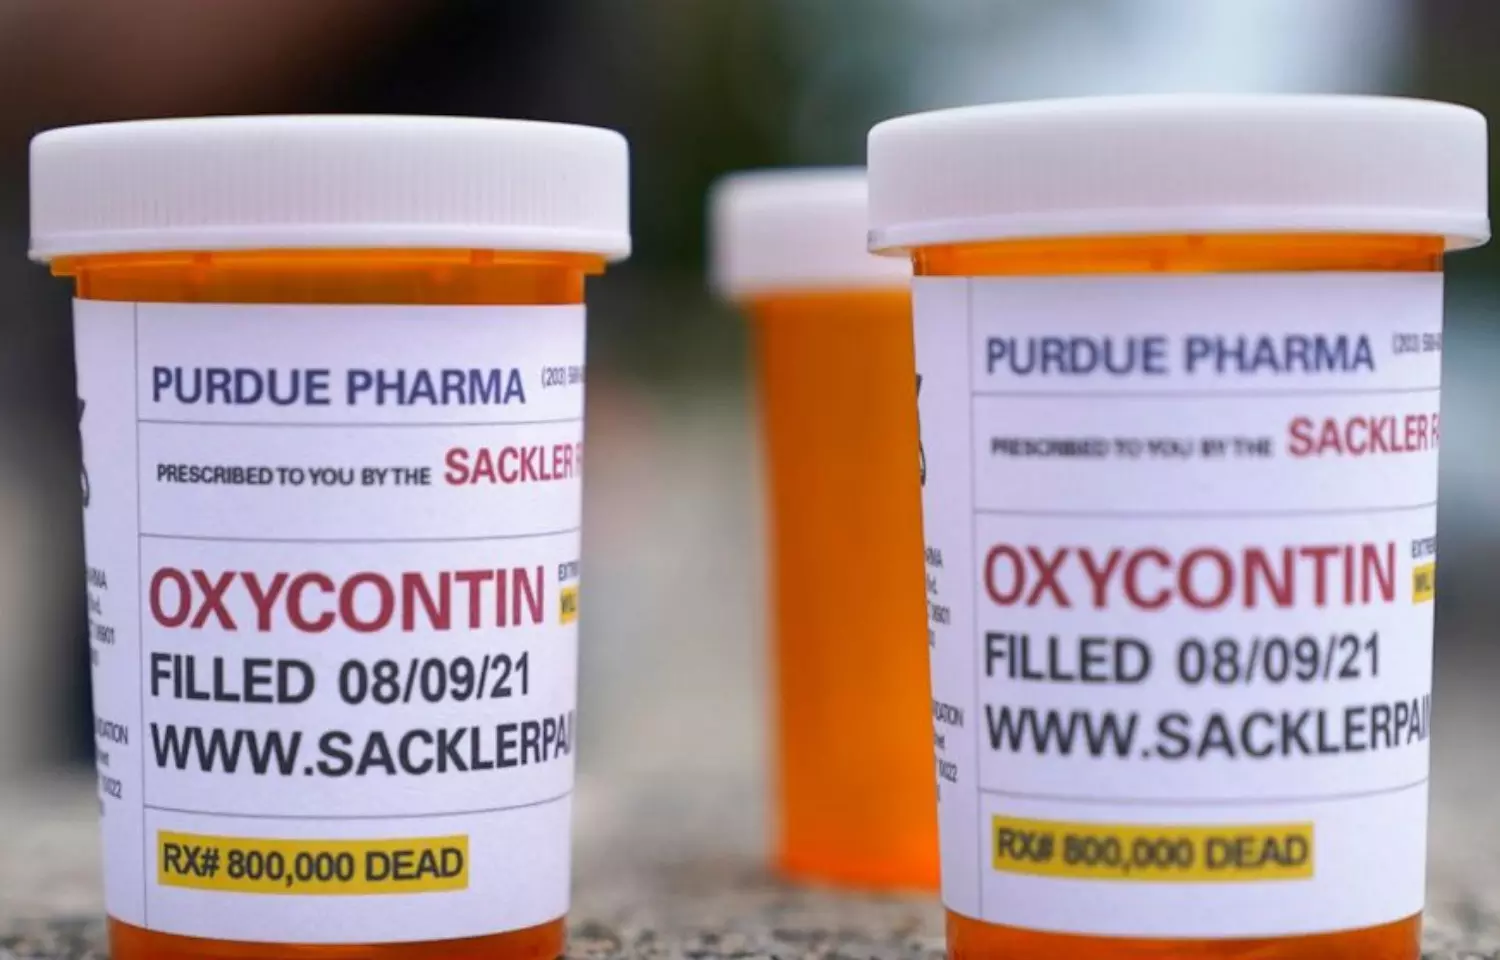 OxyContin maker seeks approval for latest settlement plan in US